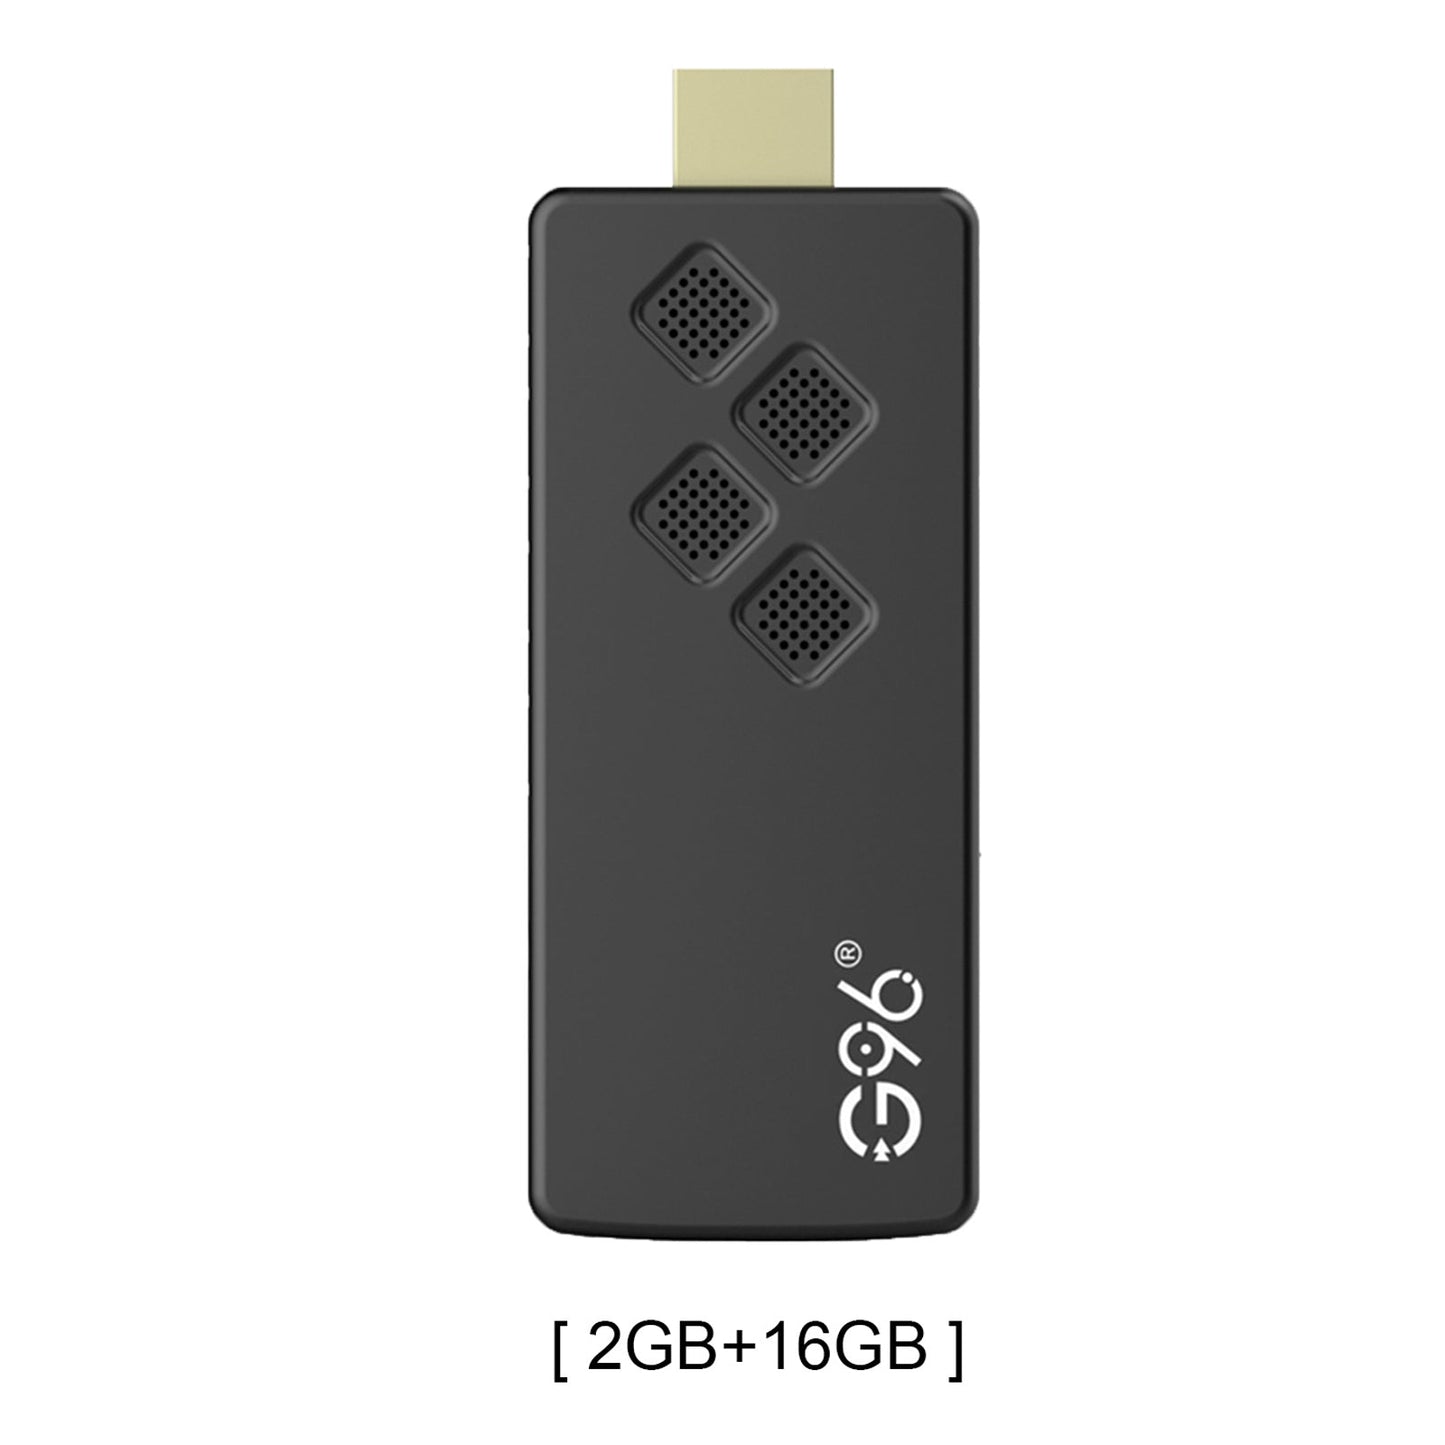 G96 TV Stick Android 13.0 Dual-Band Set-Top-Box 4K Player Bluetooth Voice TV BOX